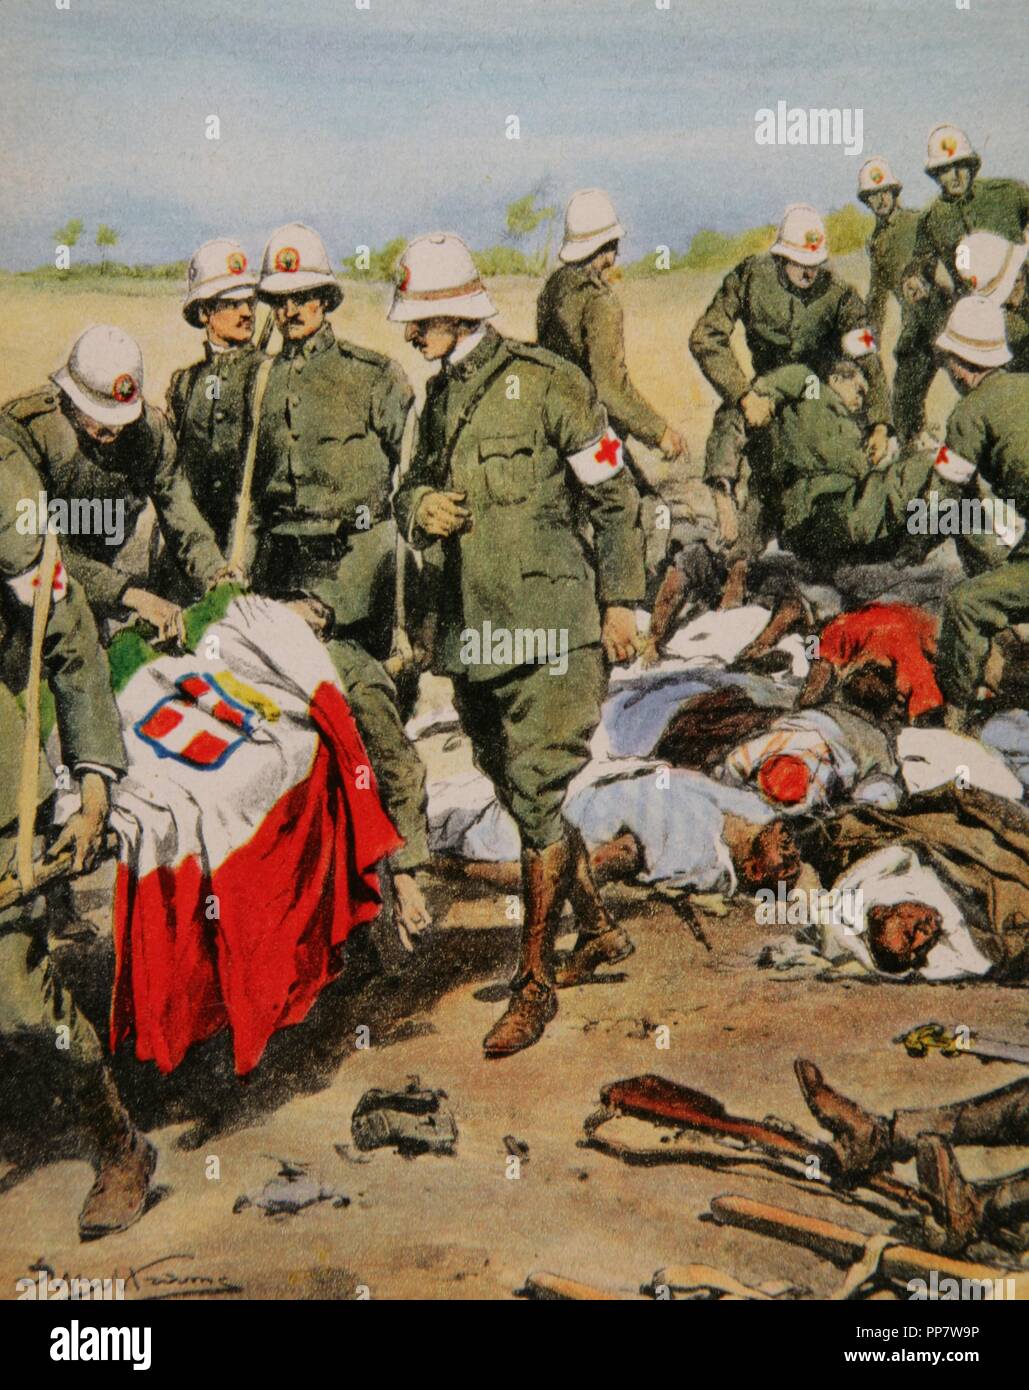 War of Libya or Italo-Turkish War (1911-1912). Conflict between the Ottoman Empire and the Kingdom of Italy. The bodies of the lieutenants Solaroli and Granafei, who fell on October 26, 1911. Engraving of La Domenica del Corriere, Italy. Stock Photo